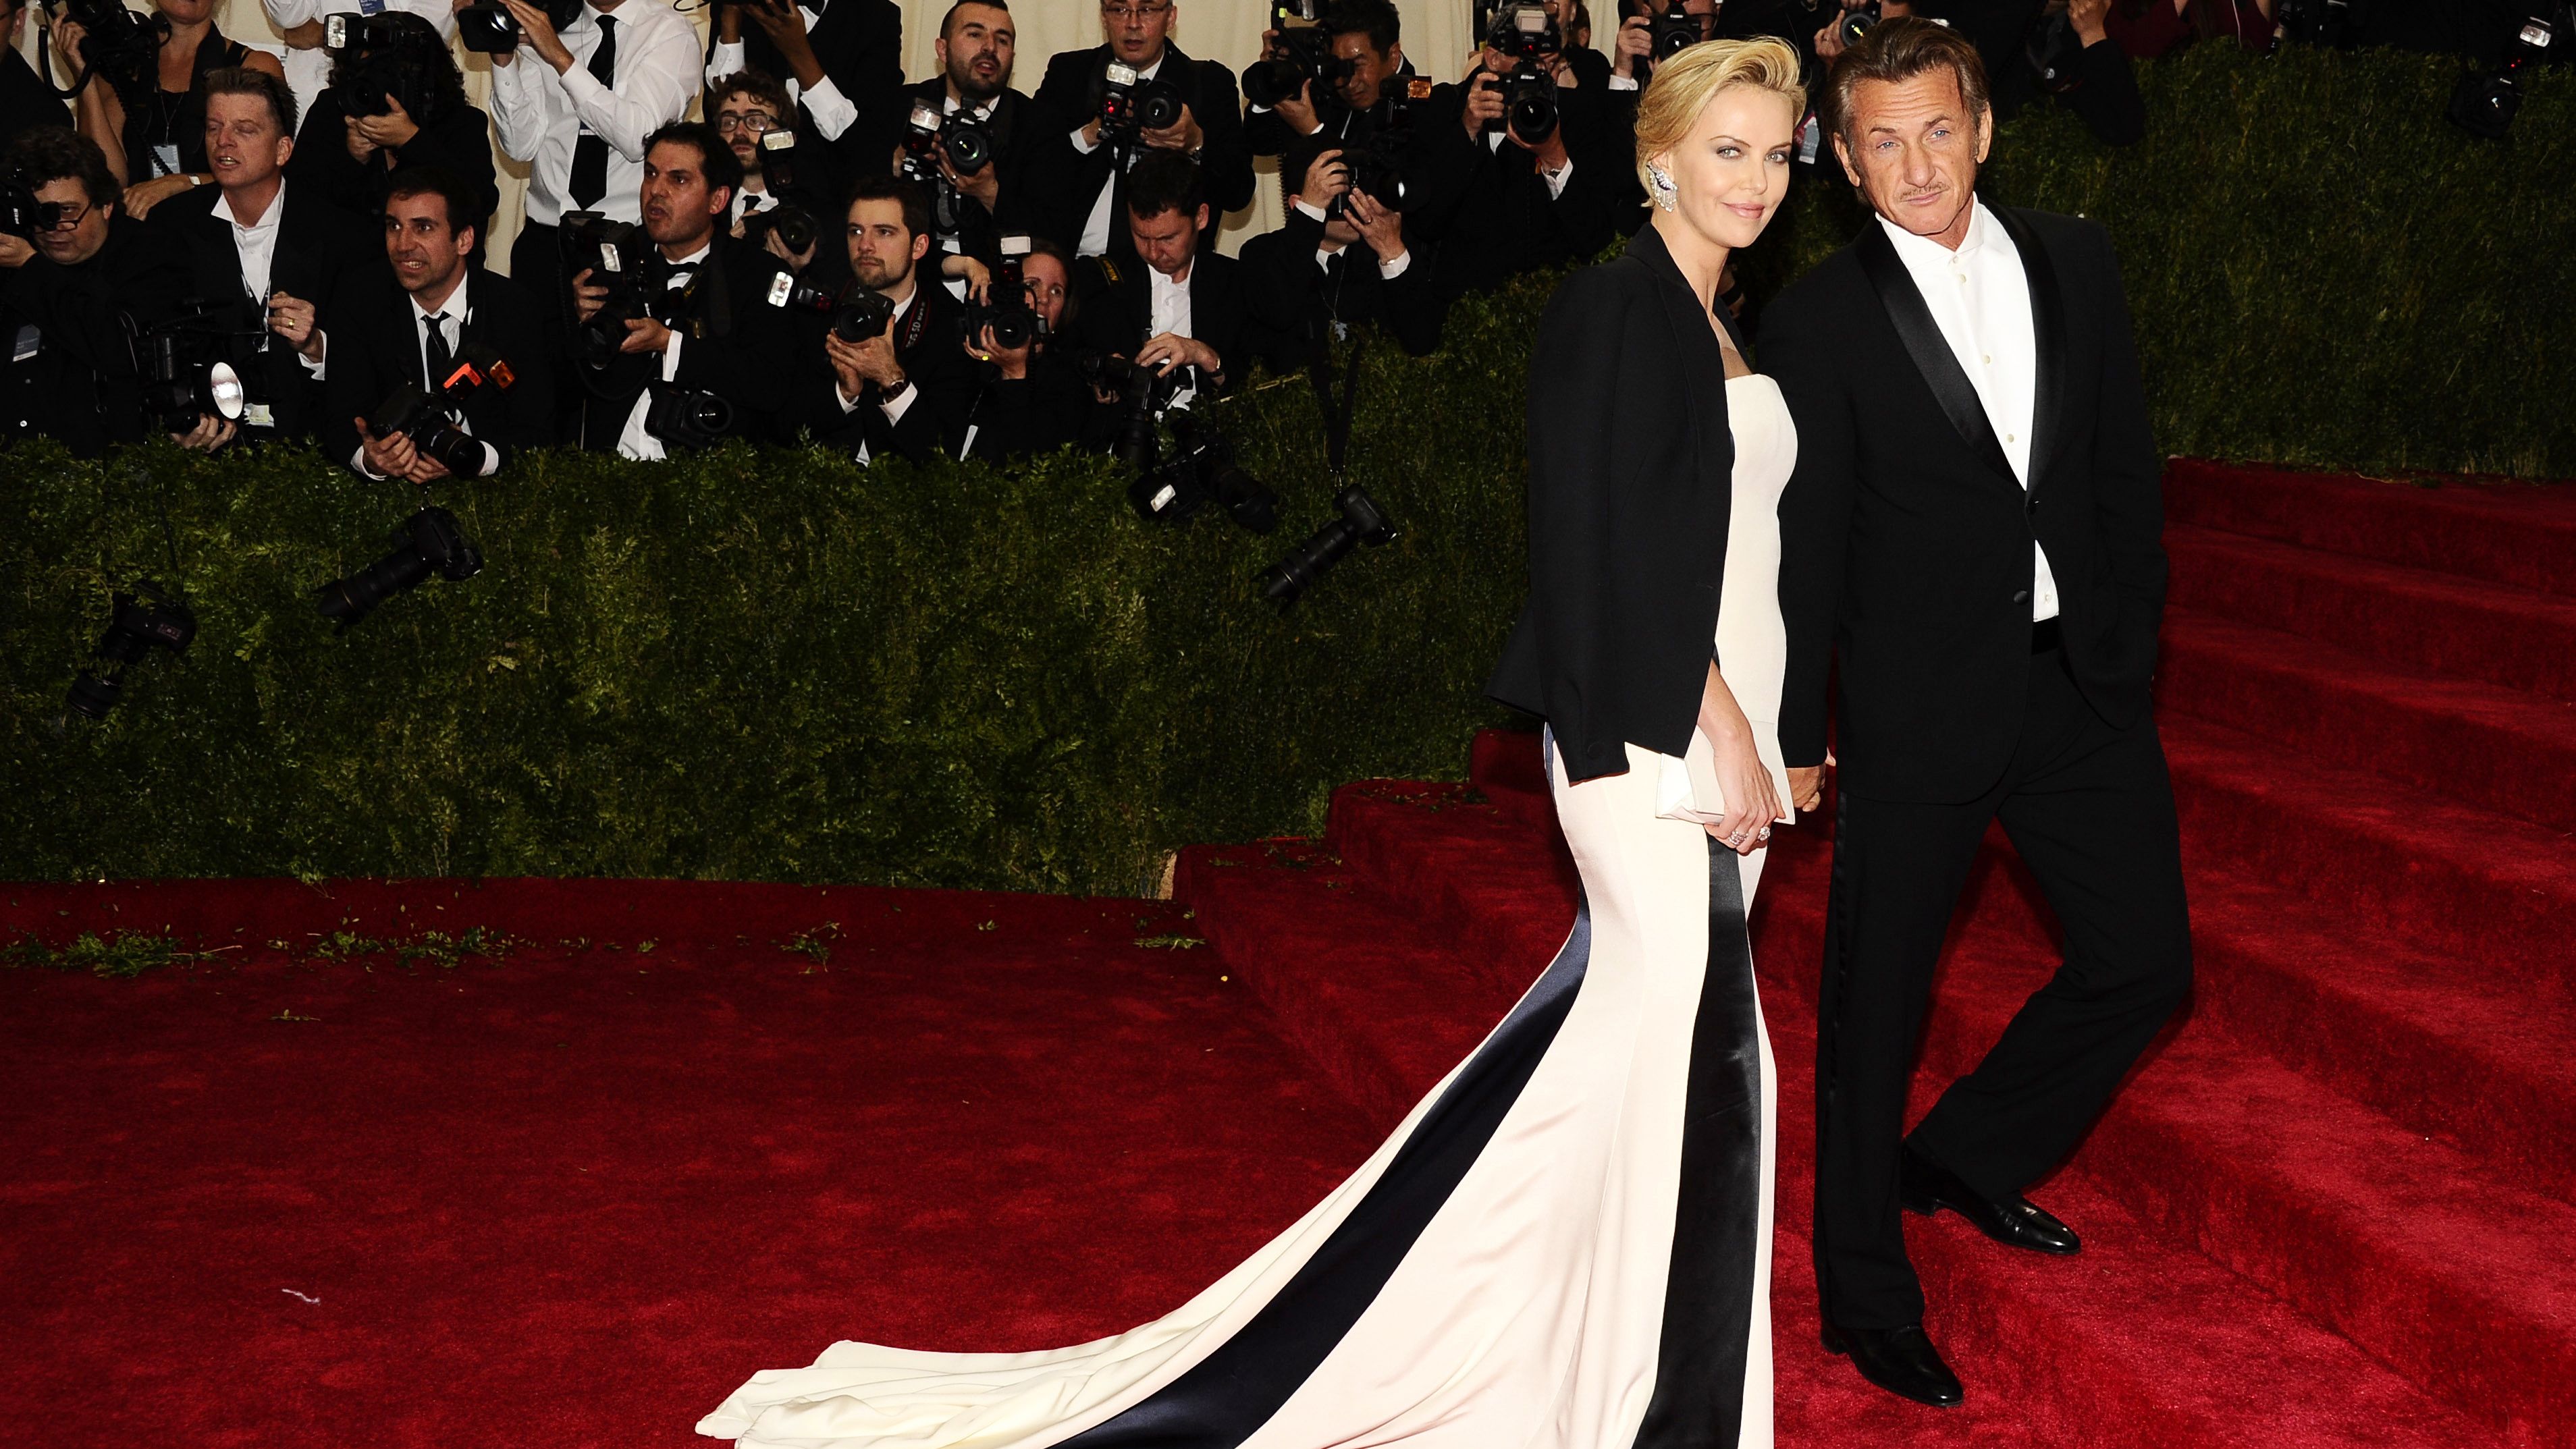 Photos from 2014 Met Gala: Red Carpet Couples